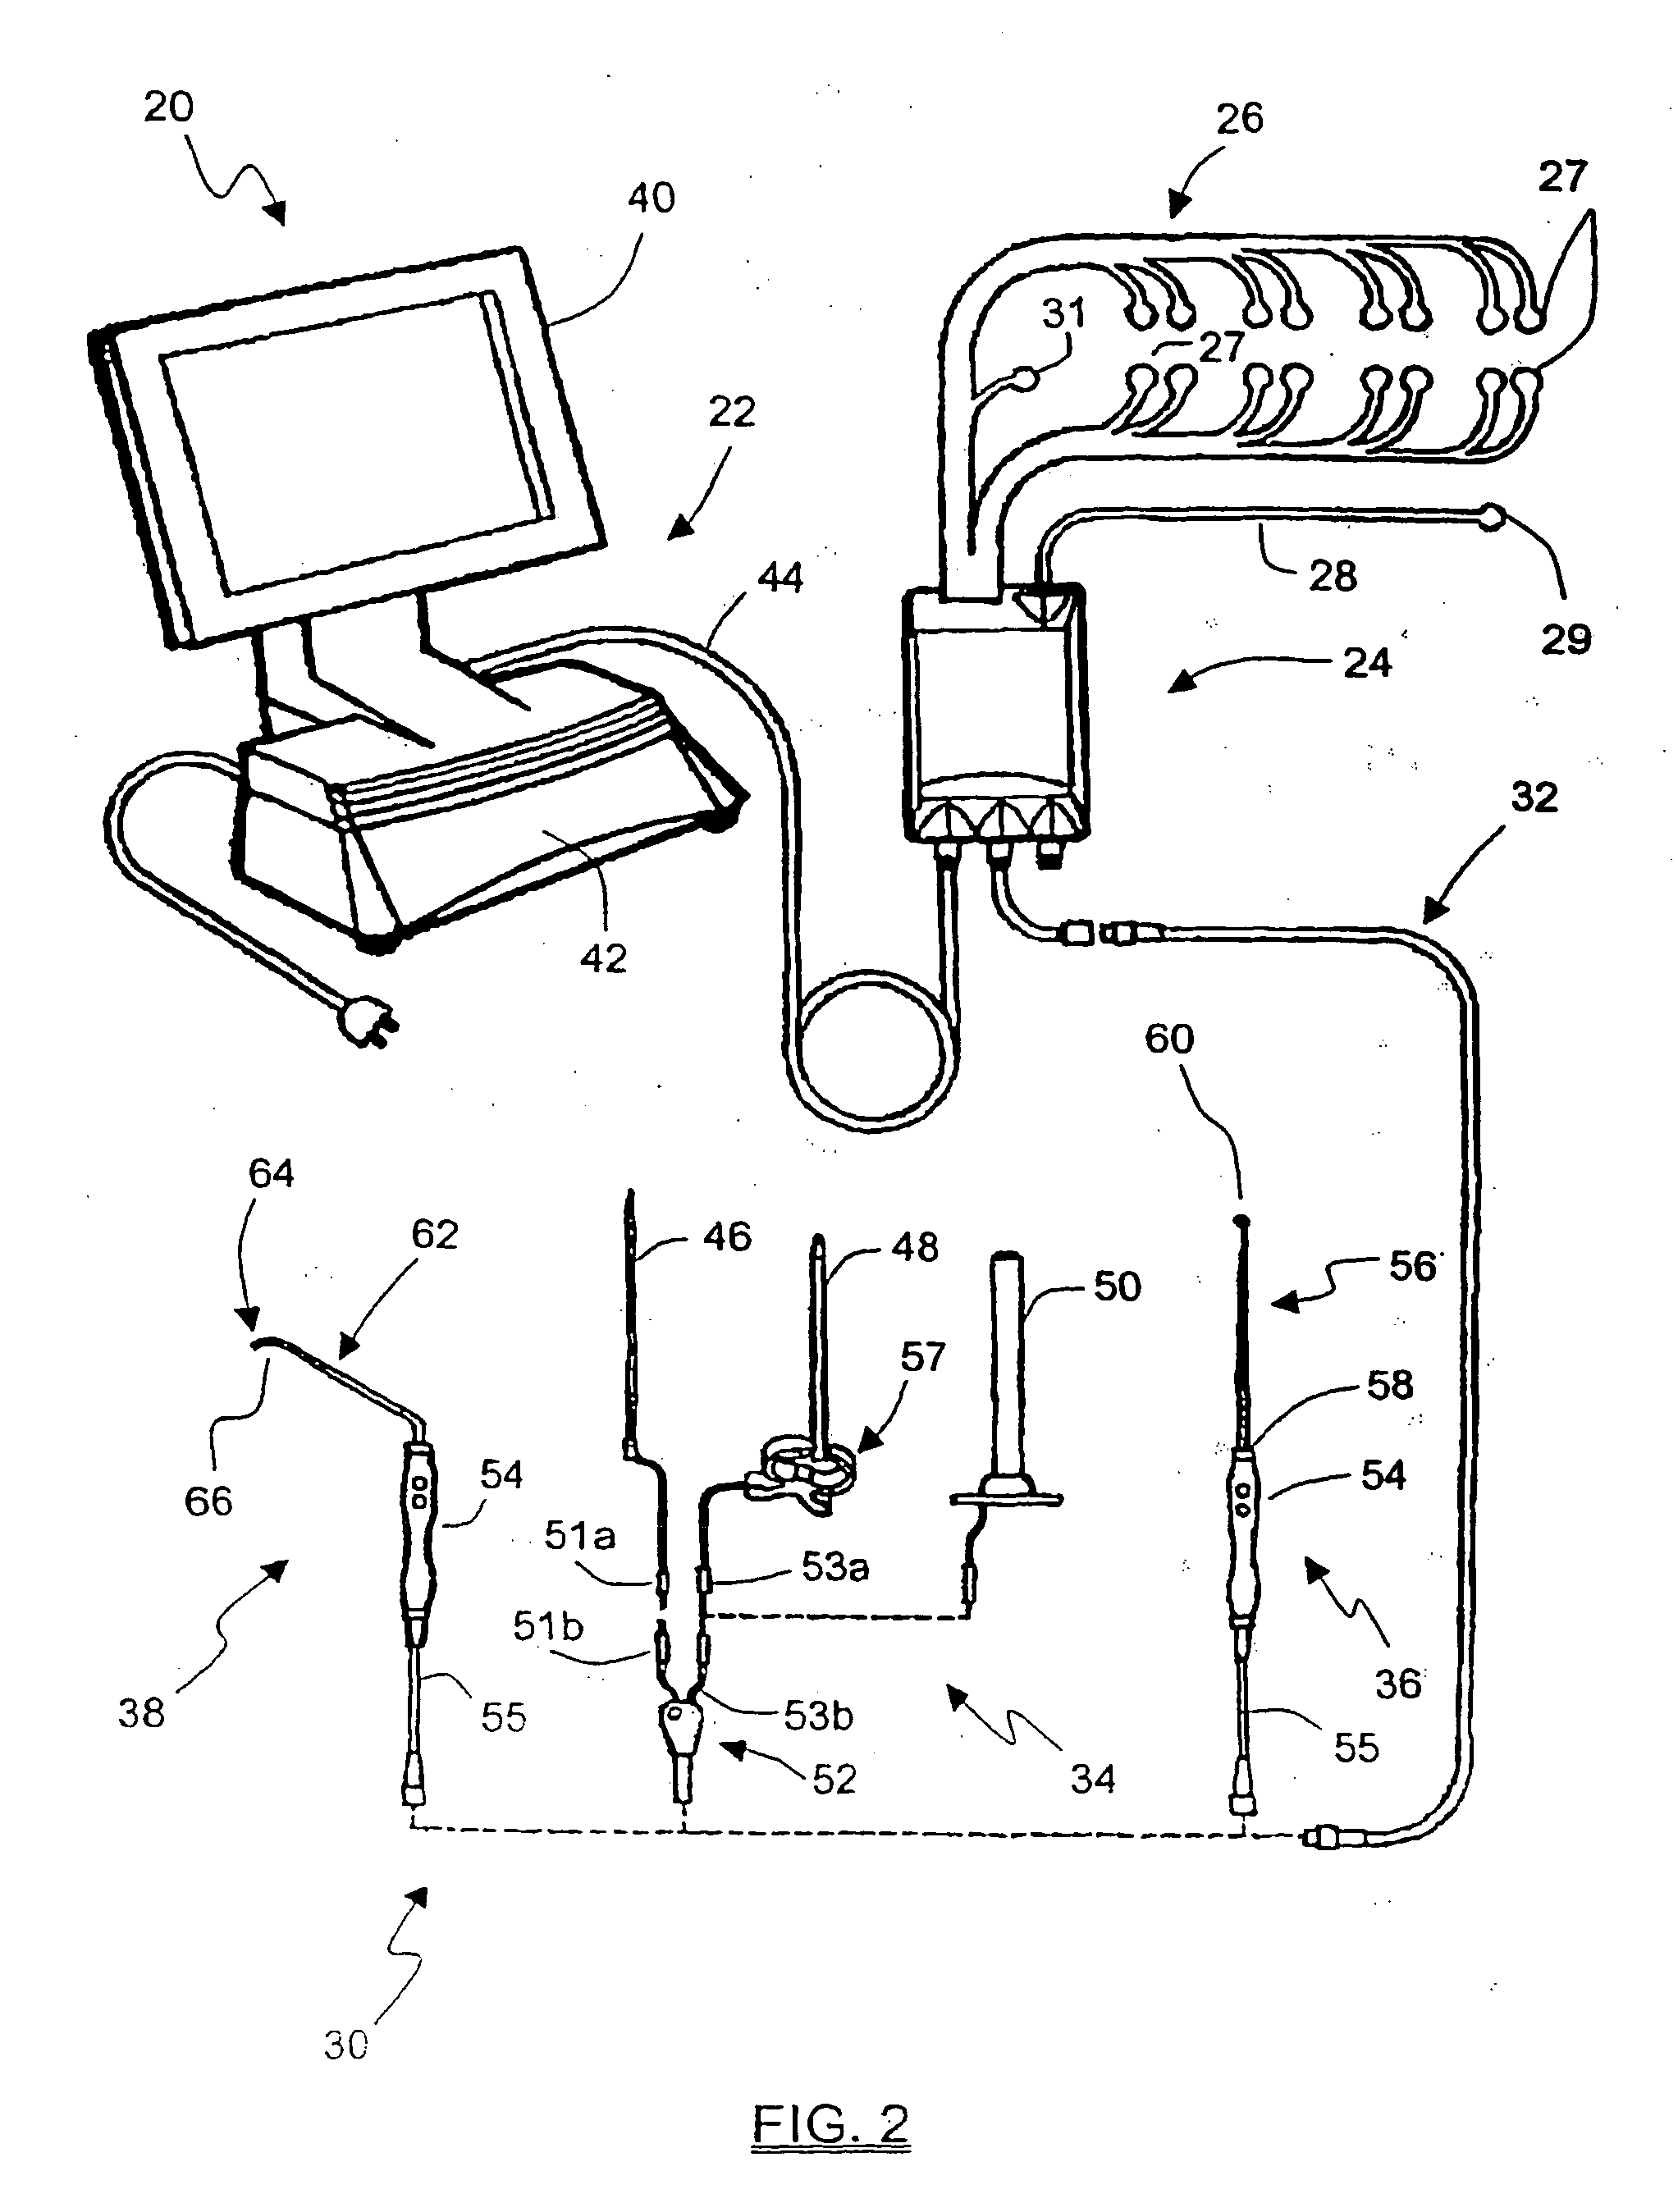 System and methods for performing surgical procedures and assessments